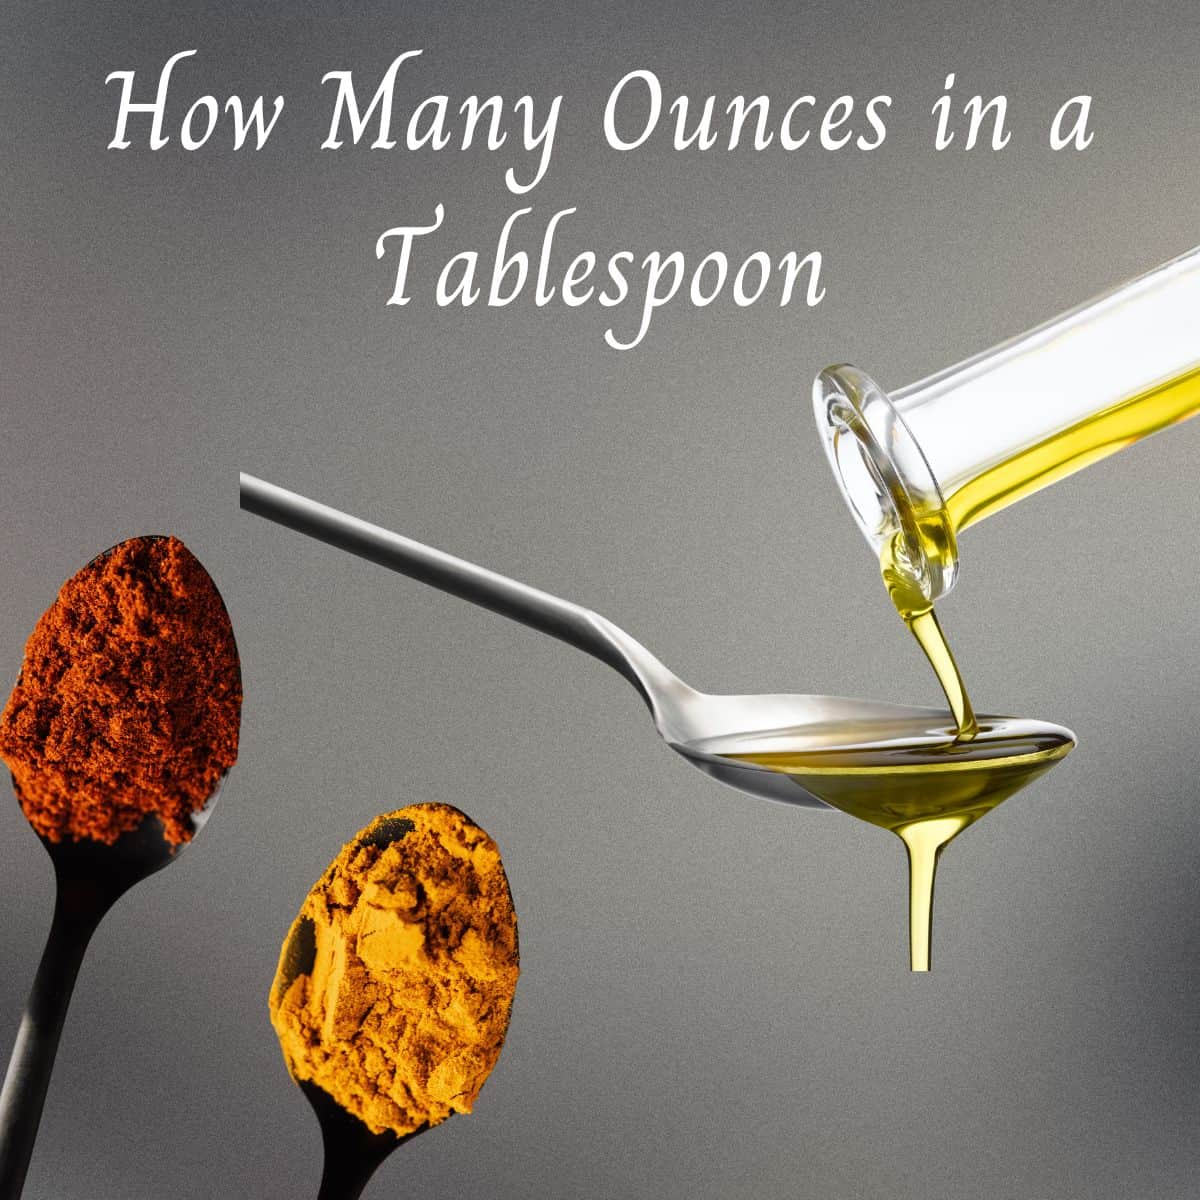 How many ounces in a tablespoon - Yummy Indian Kitchen